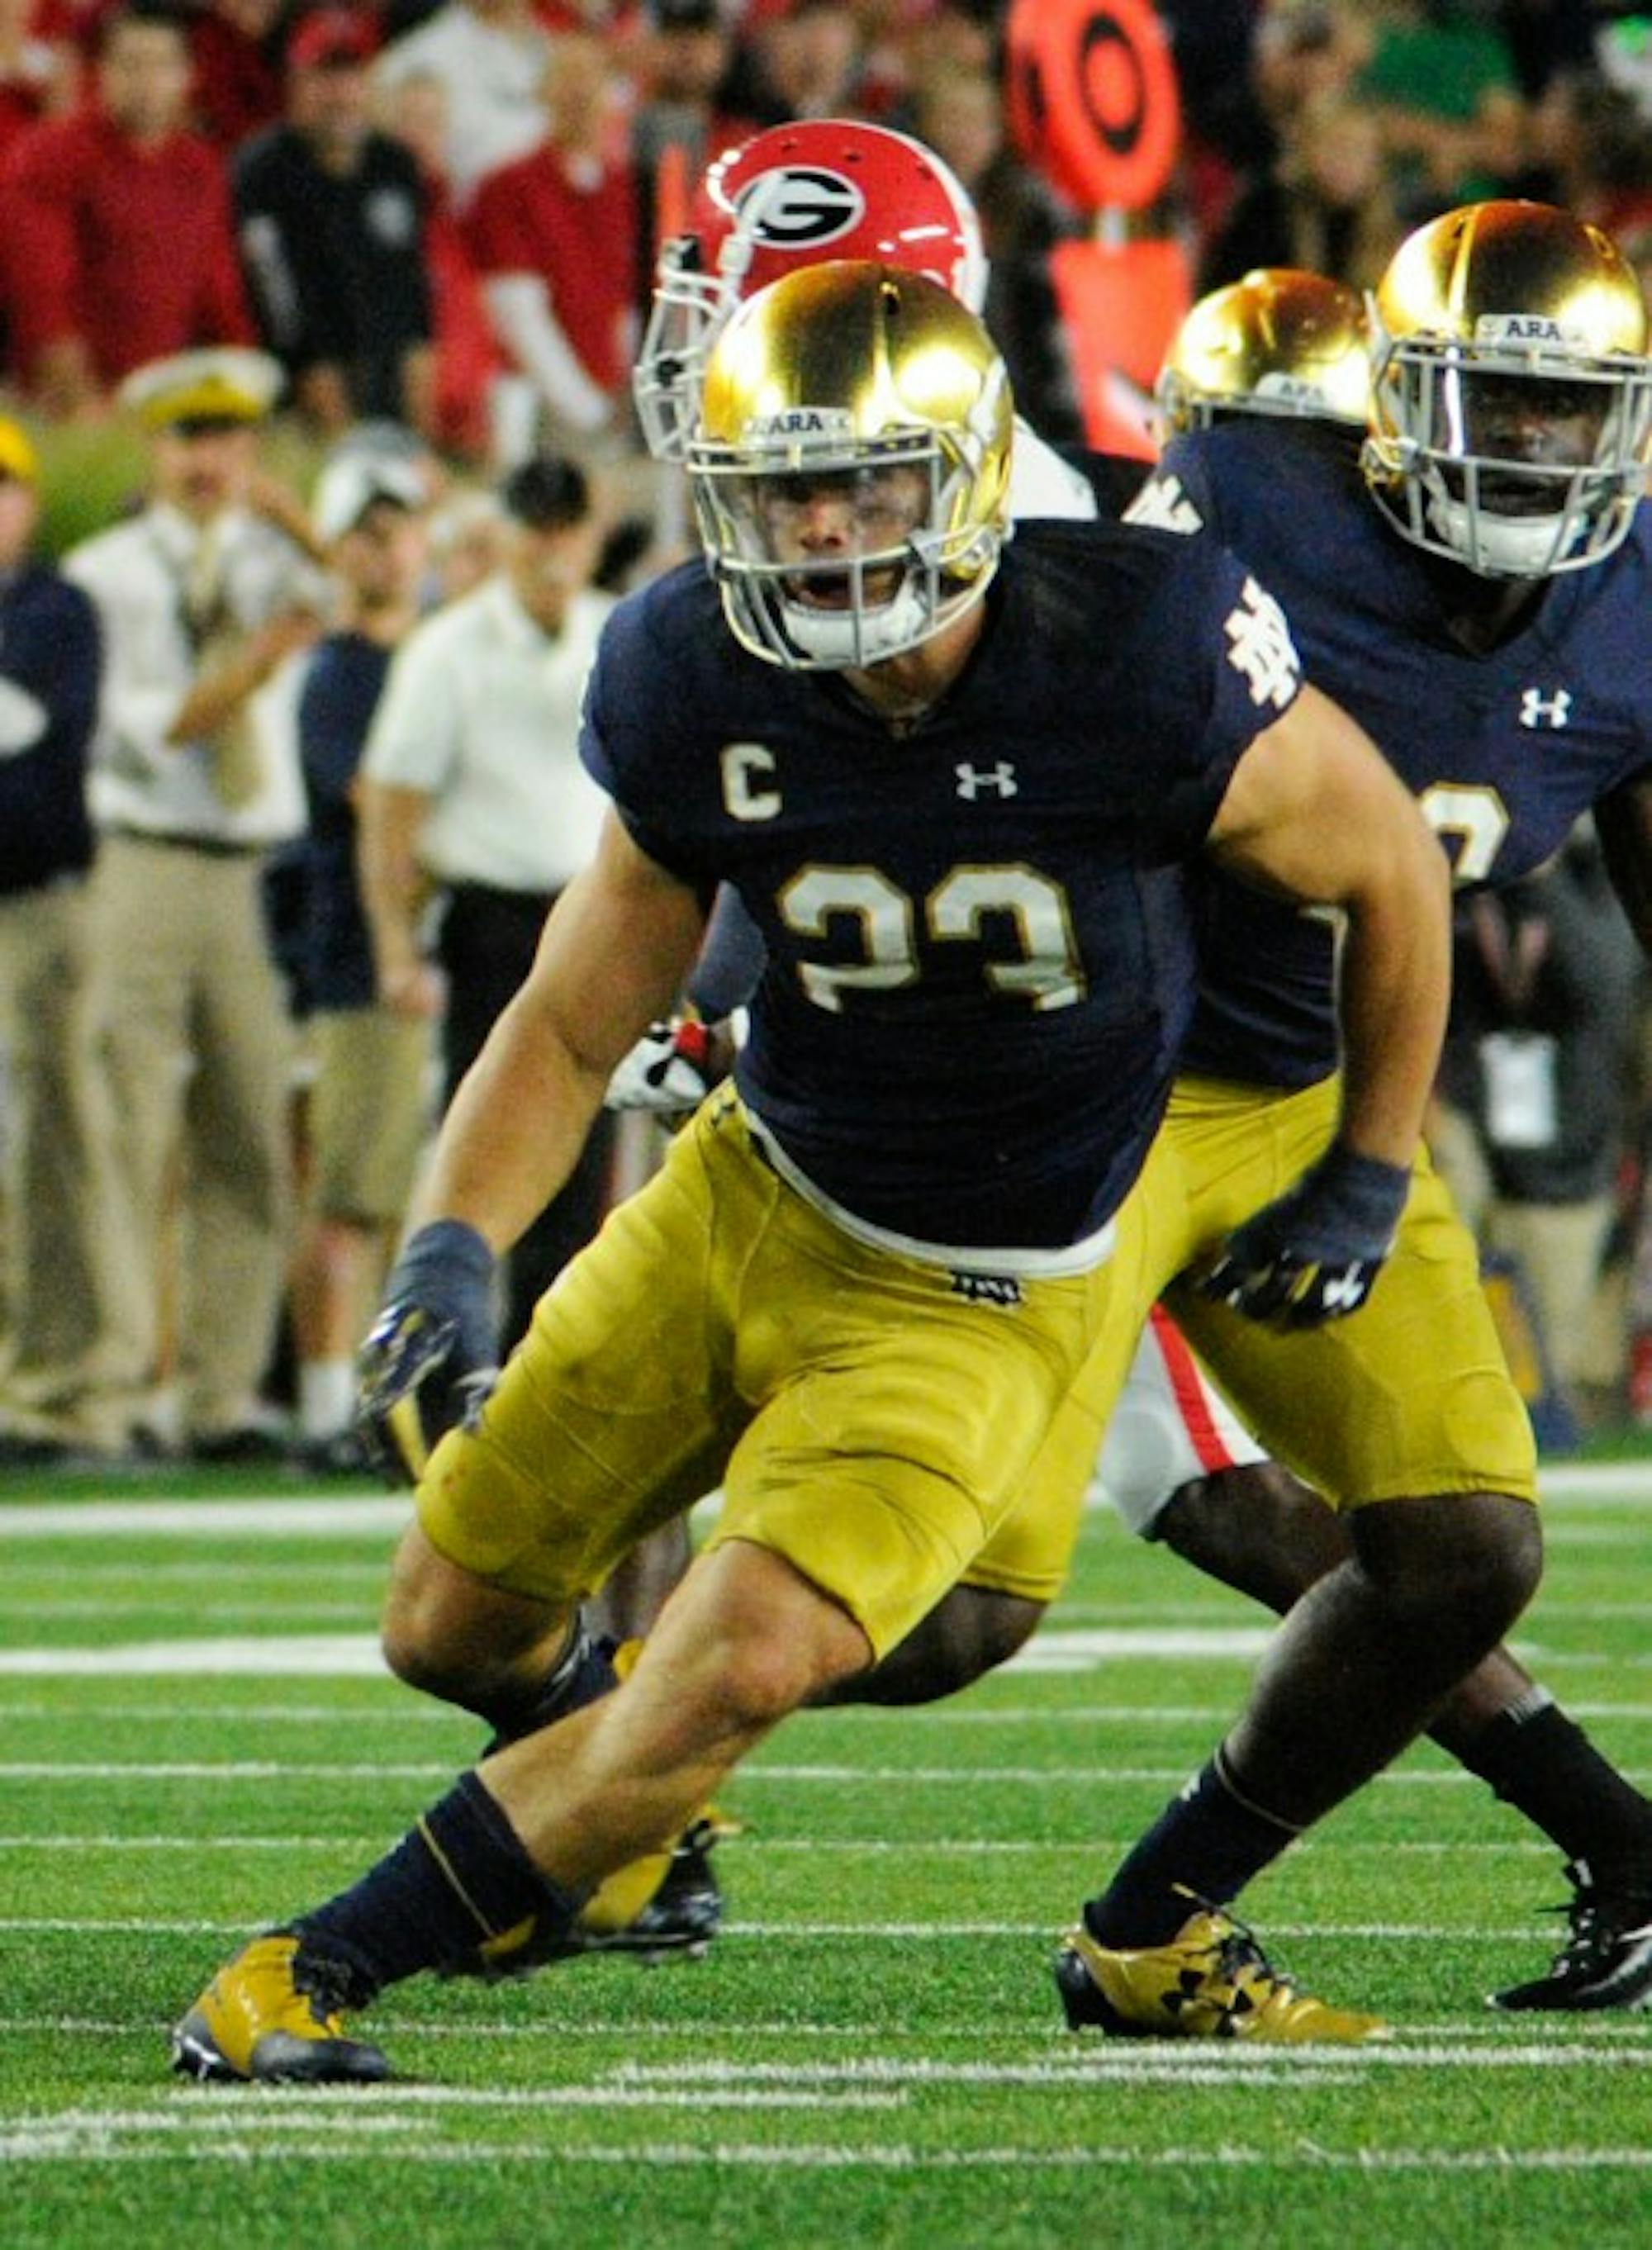 Senior linebacker Drue Tranquill goes in for a tackle during Notre Dame’s 20-19 loss to Georgia on Saturday at Notre Dame Stadium.